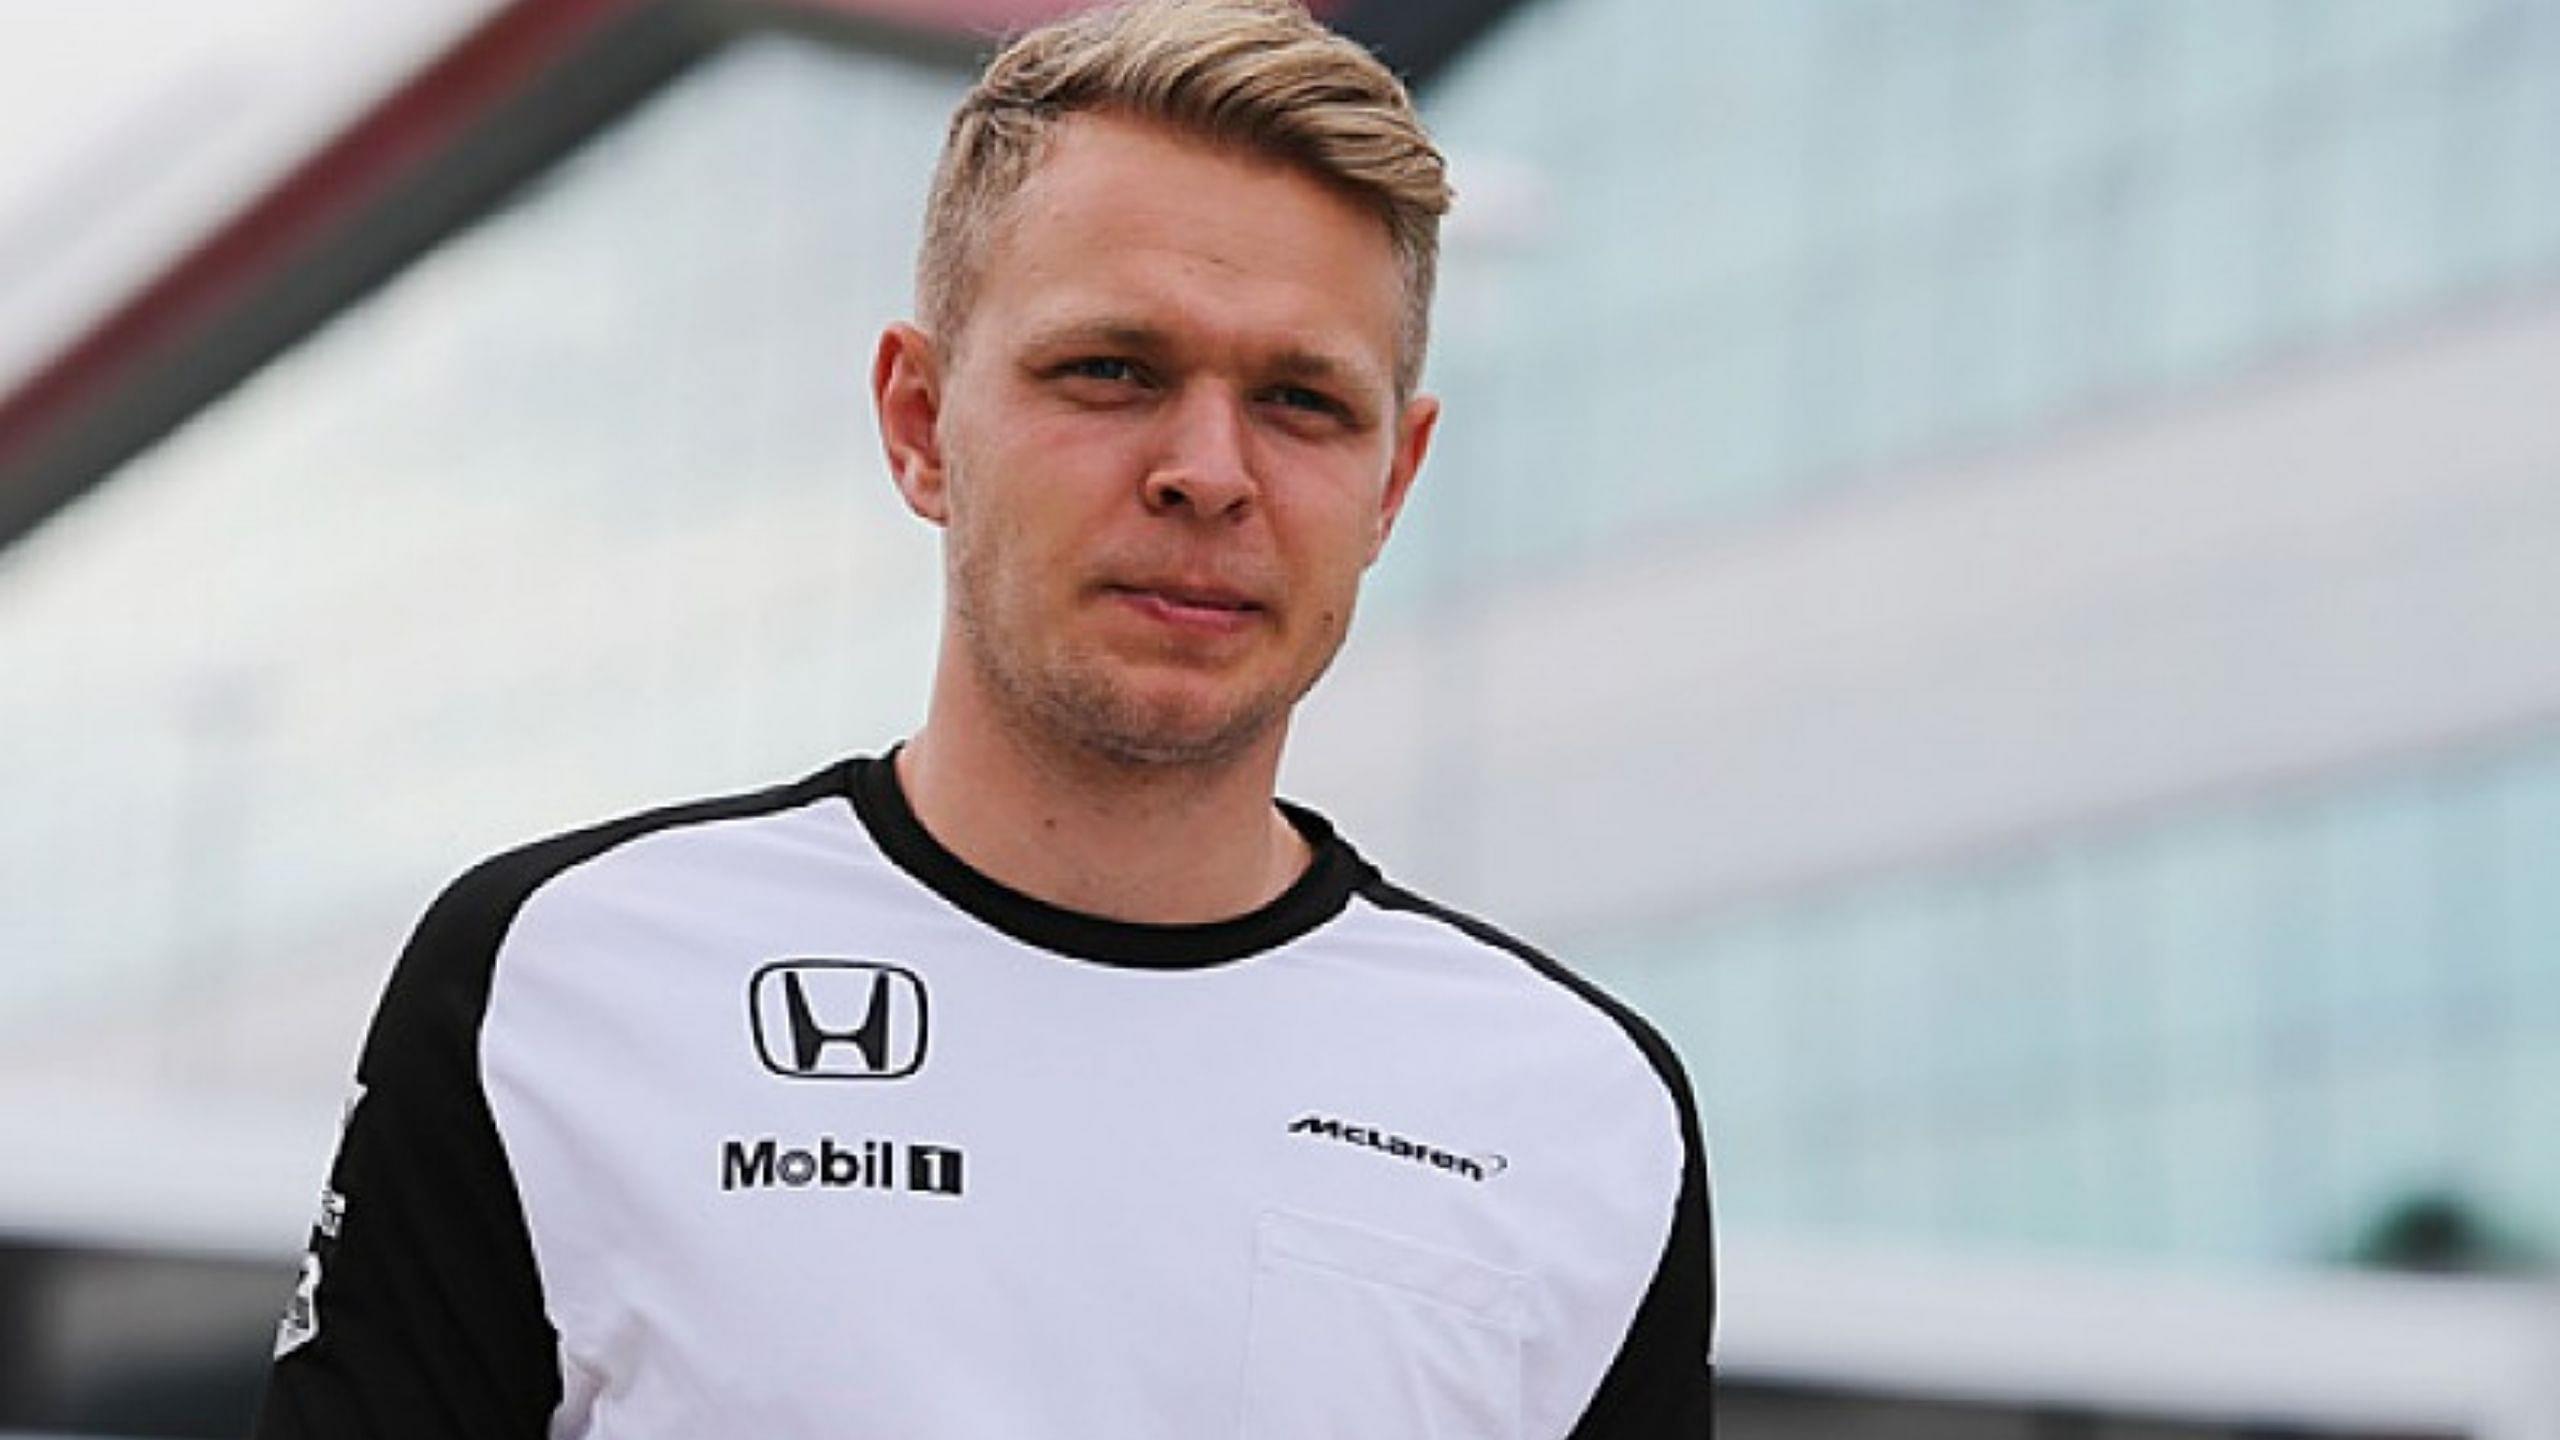 "It was clearly an option" - Ex-F1 driver Kevin Magnussen reveals the team he turned down in 2019 to continue with high-flying American outfit Haas.